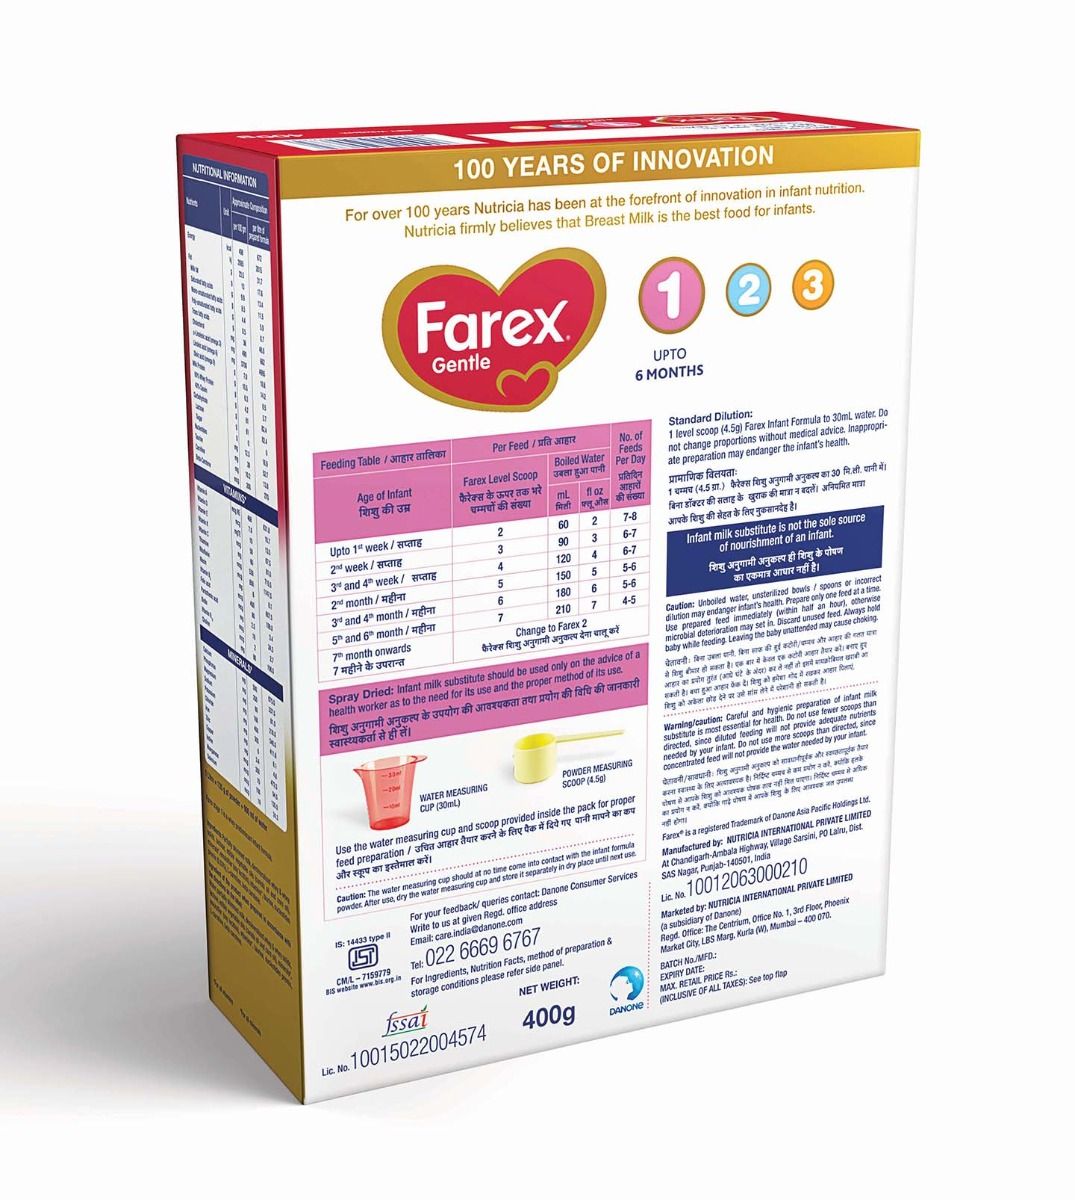 Farex Infant Formula, Stage 1, Up to 6 Months, 400 gm Refill Pack, Pack of 1 